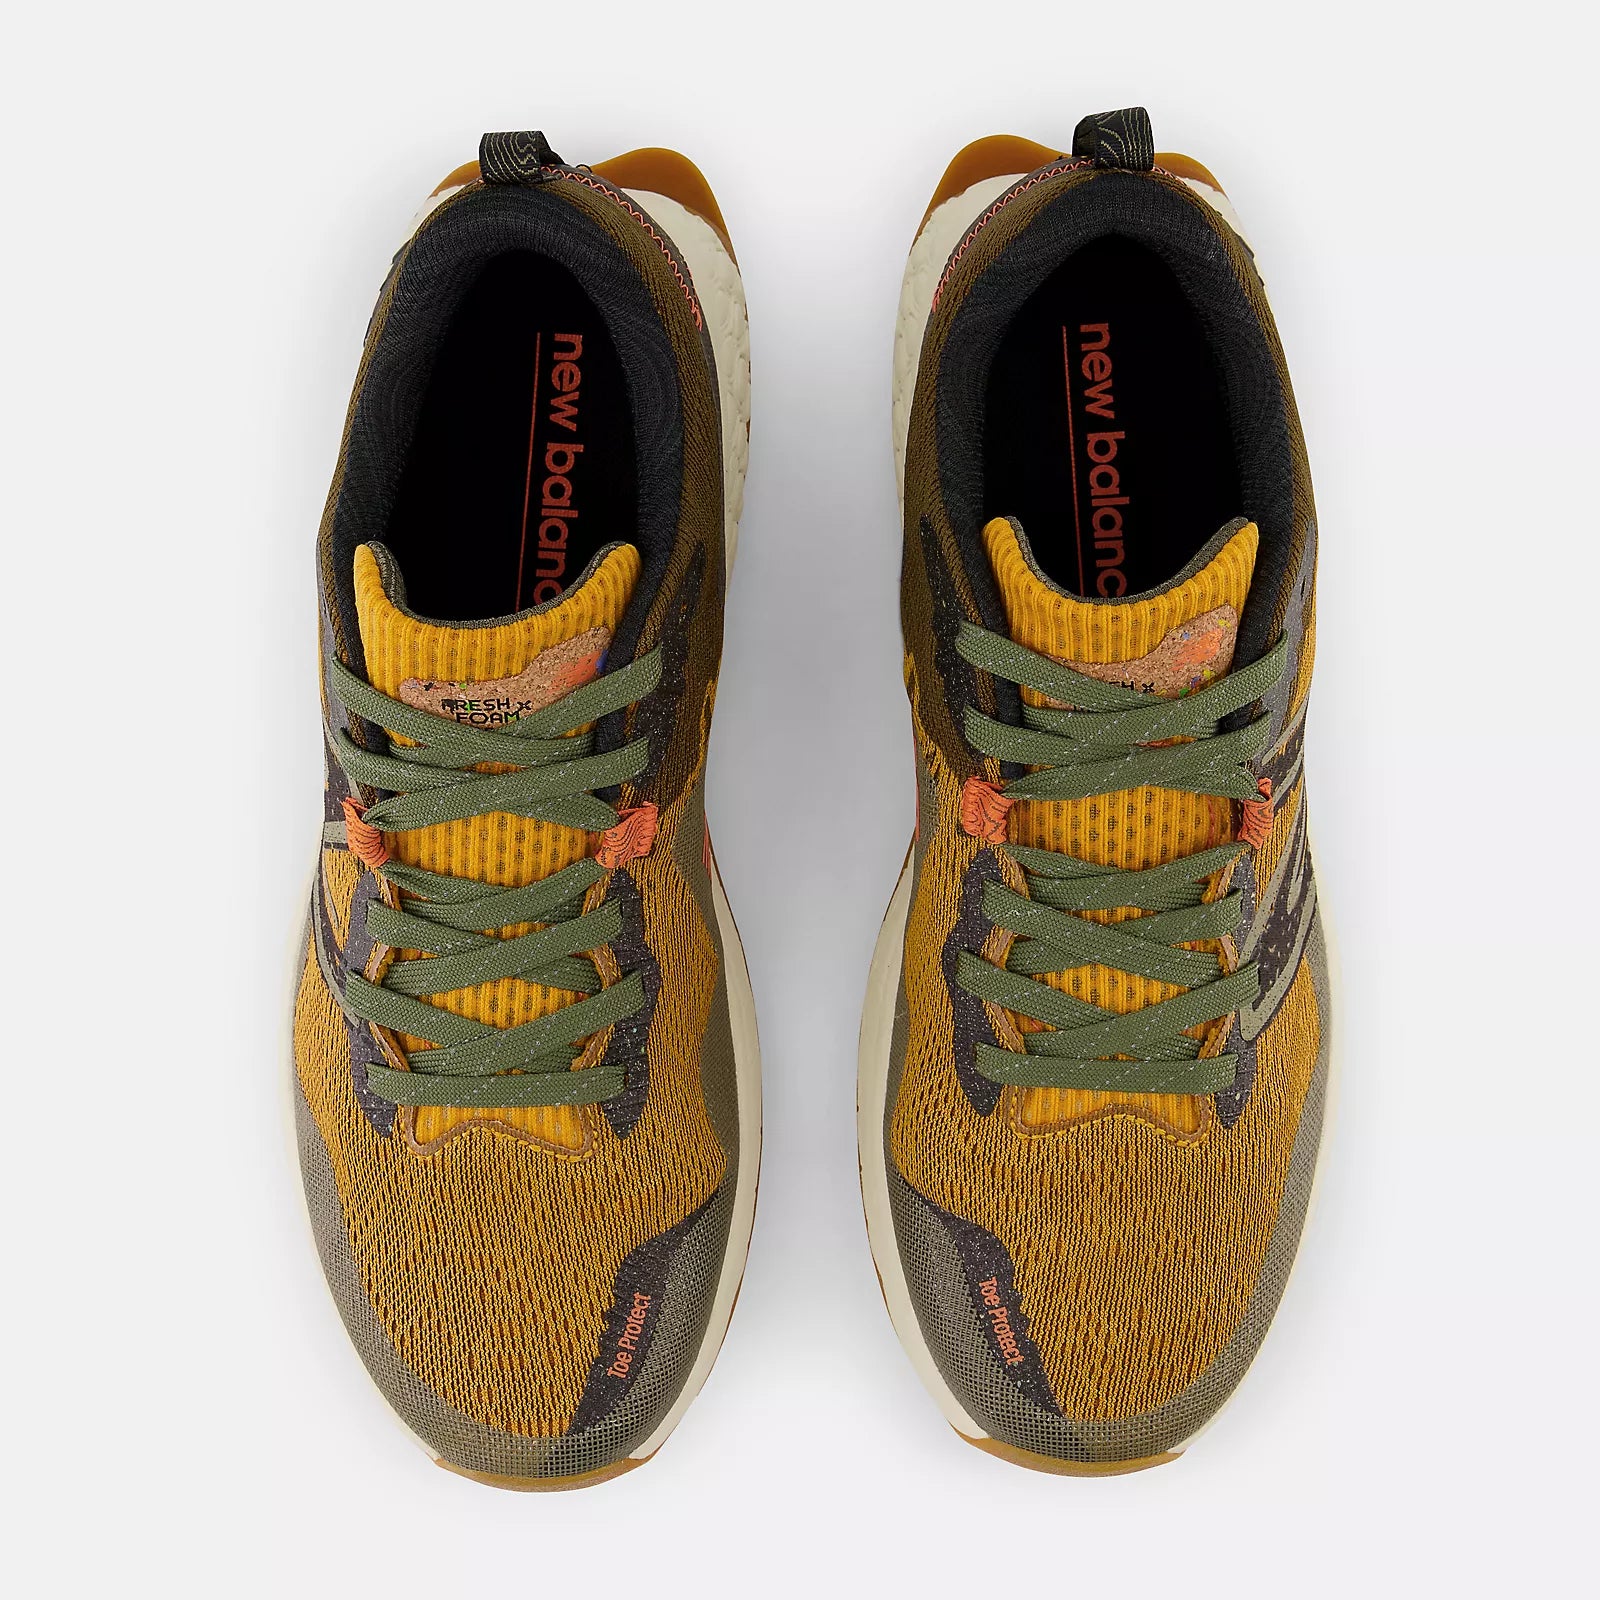 Top view of the Men's Hierro V7 trail runner by New Balance in the color Golden hour/Dark Camo/Black